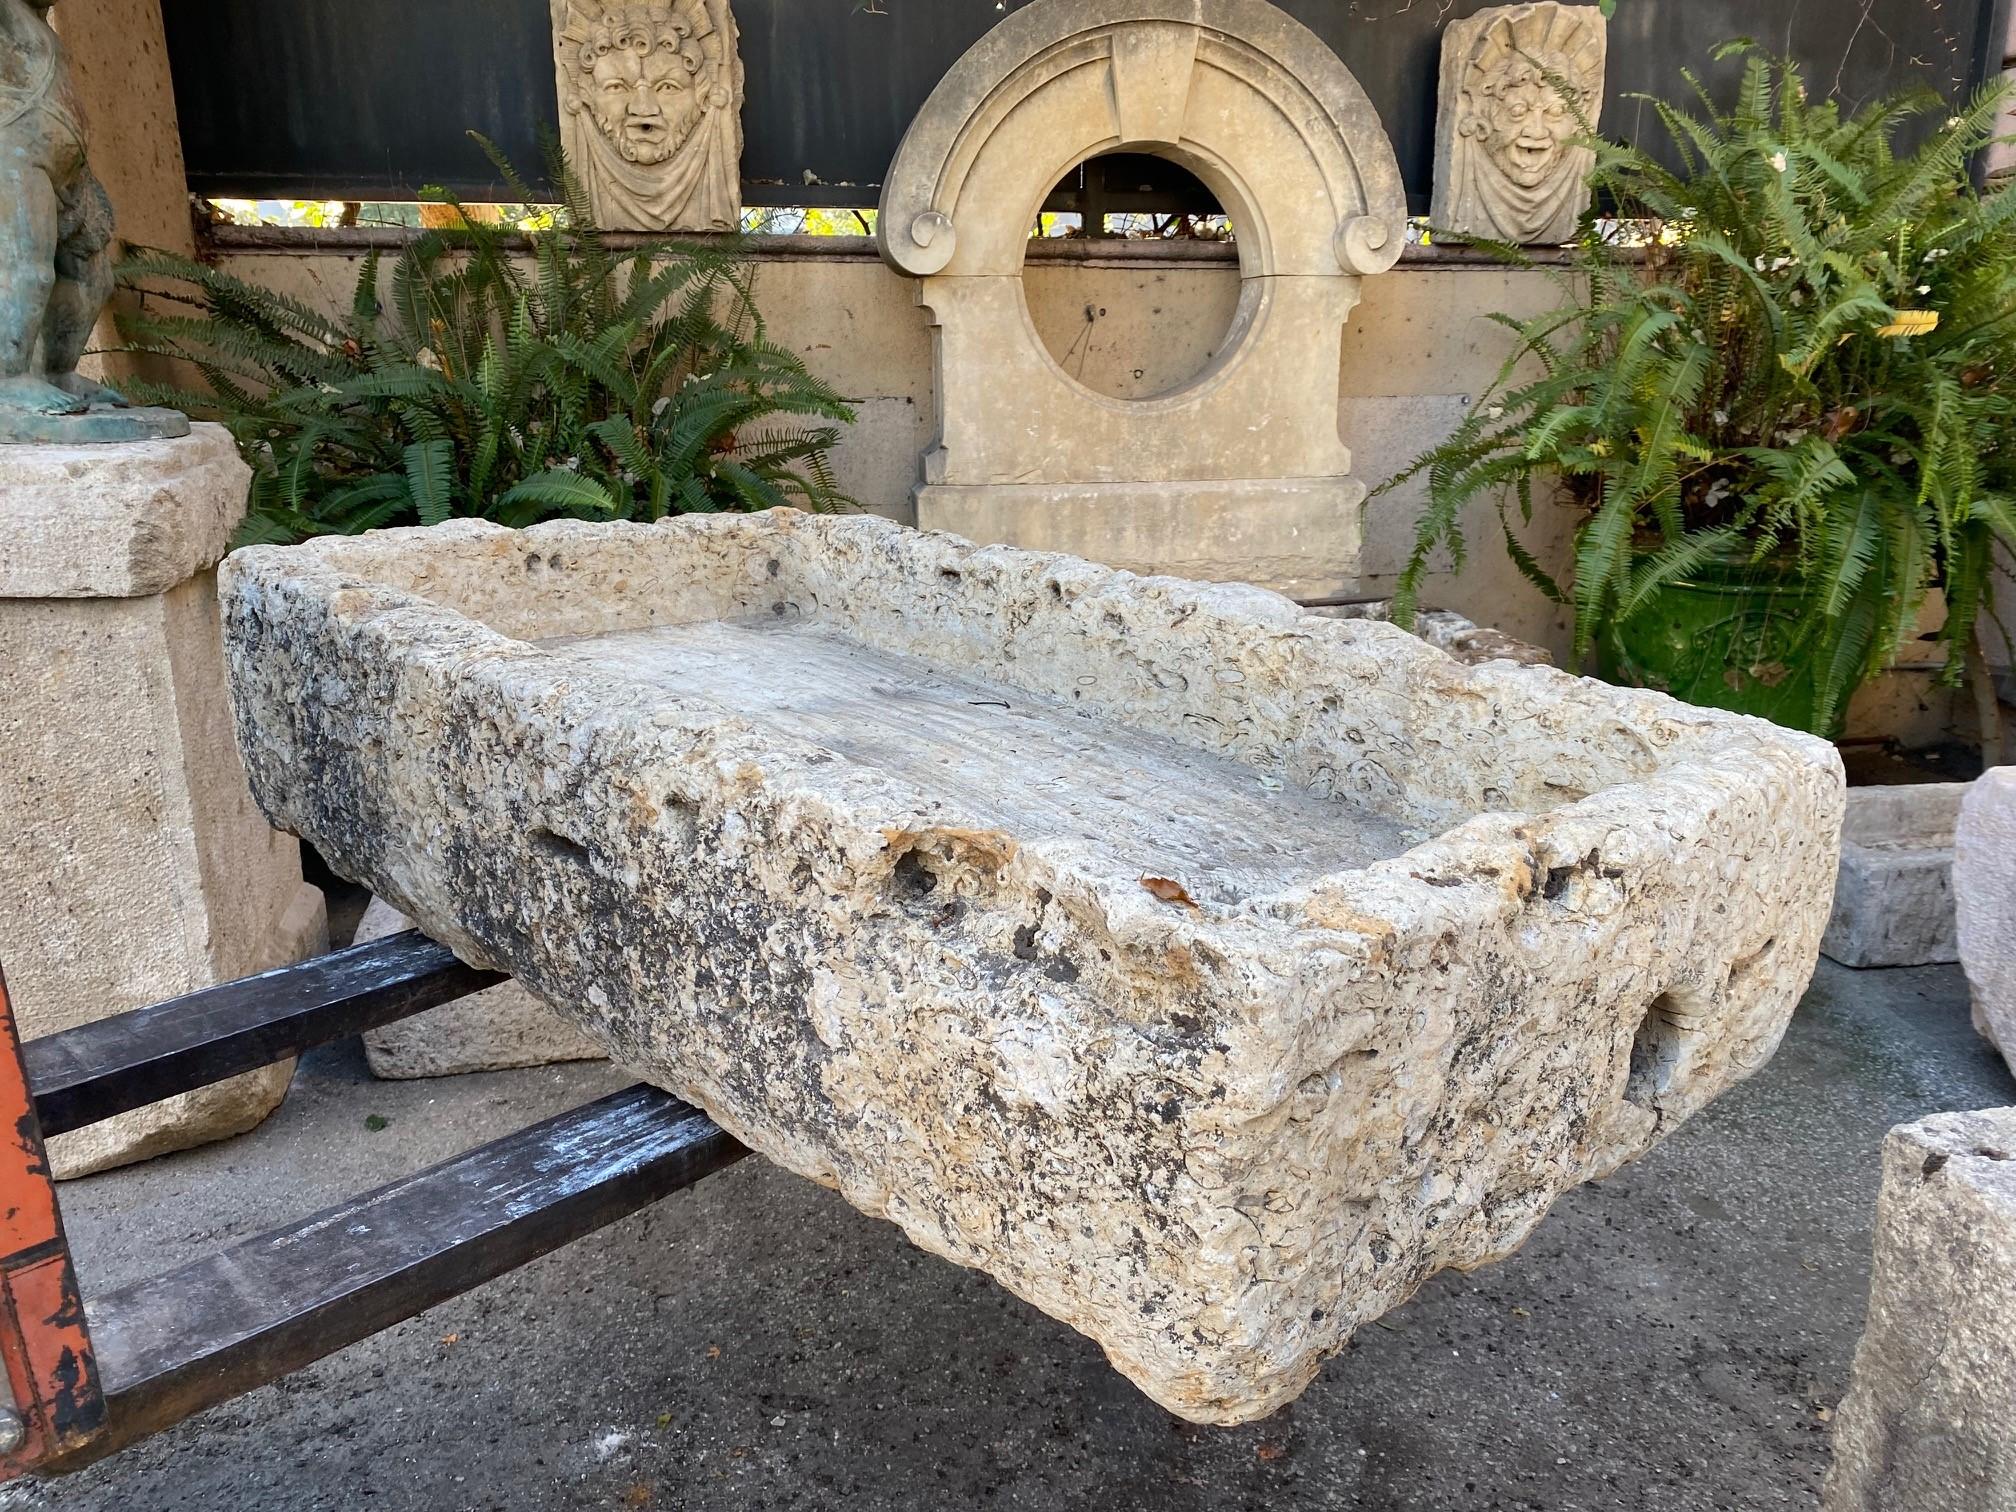 Hand-Carved Hand Carved Stone Container Farm Sink Planter Trough Antiques Basin Herb Garden For Sale